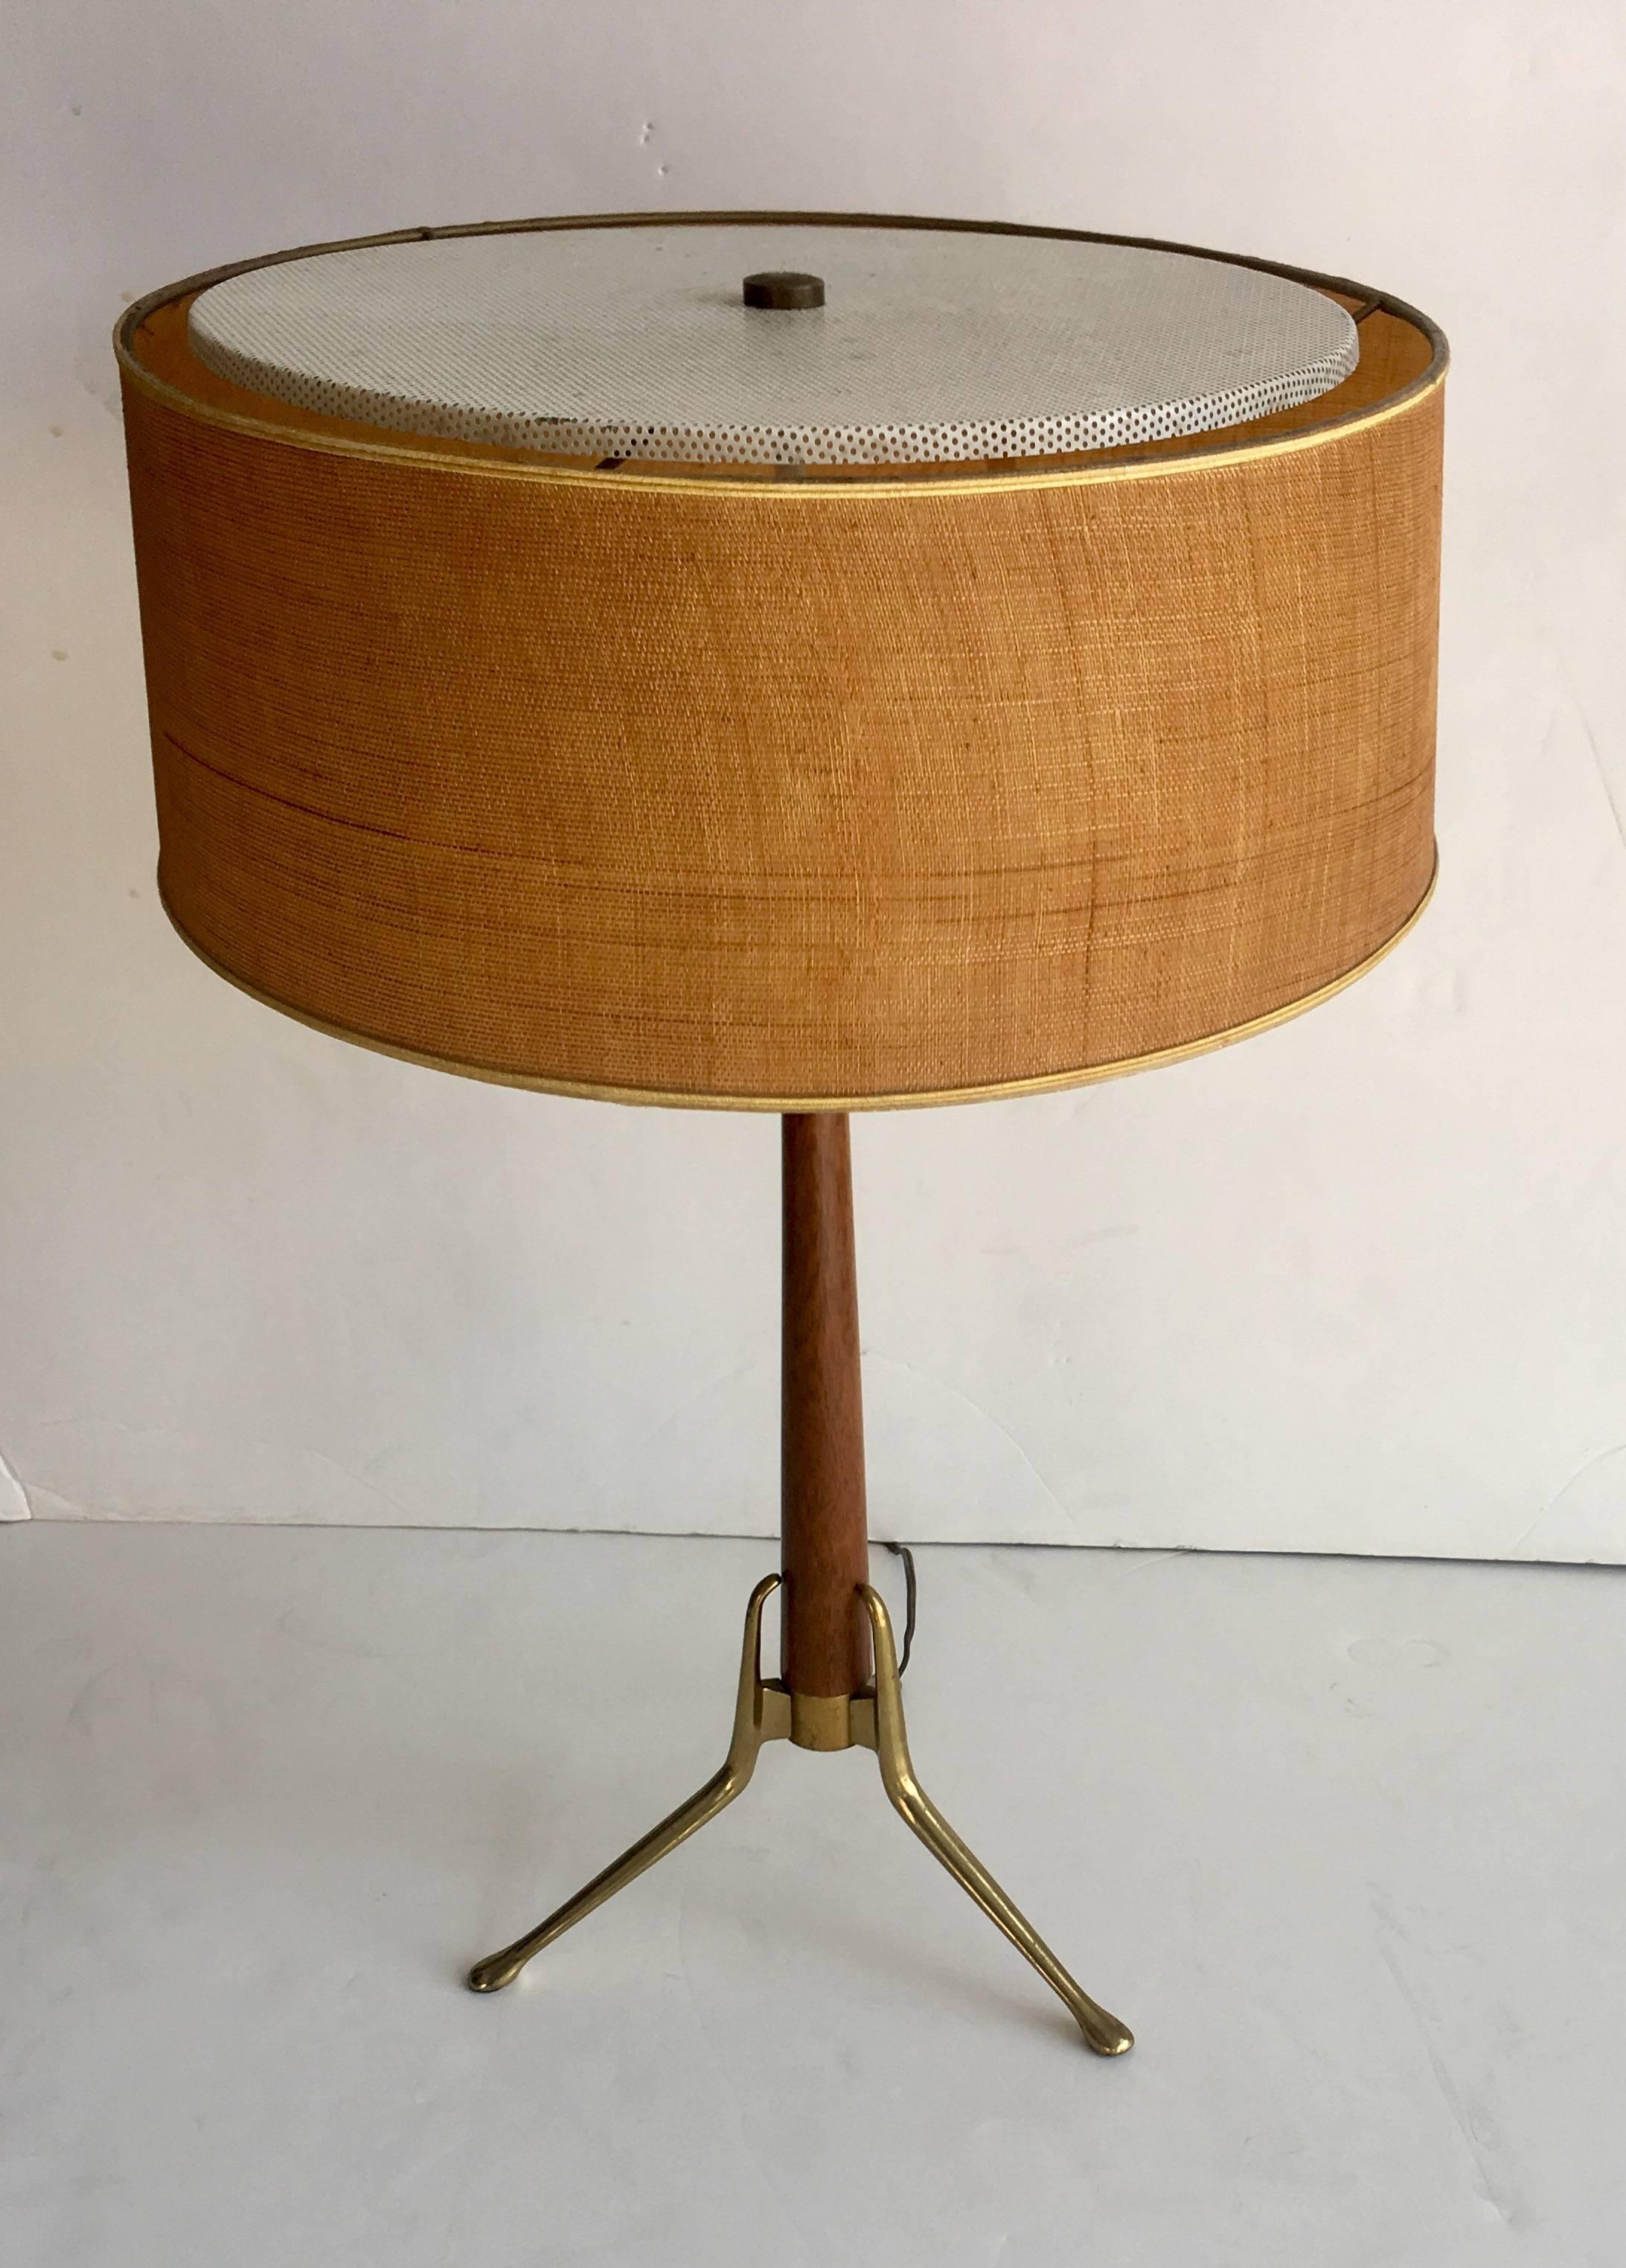 Gorgeous 1950s table lamp by Gerald Thurston. Walnut, brass and linen, with perforated and enameled steel top shade.